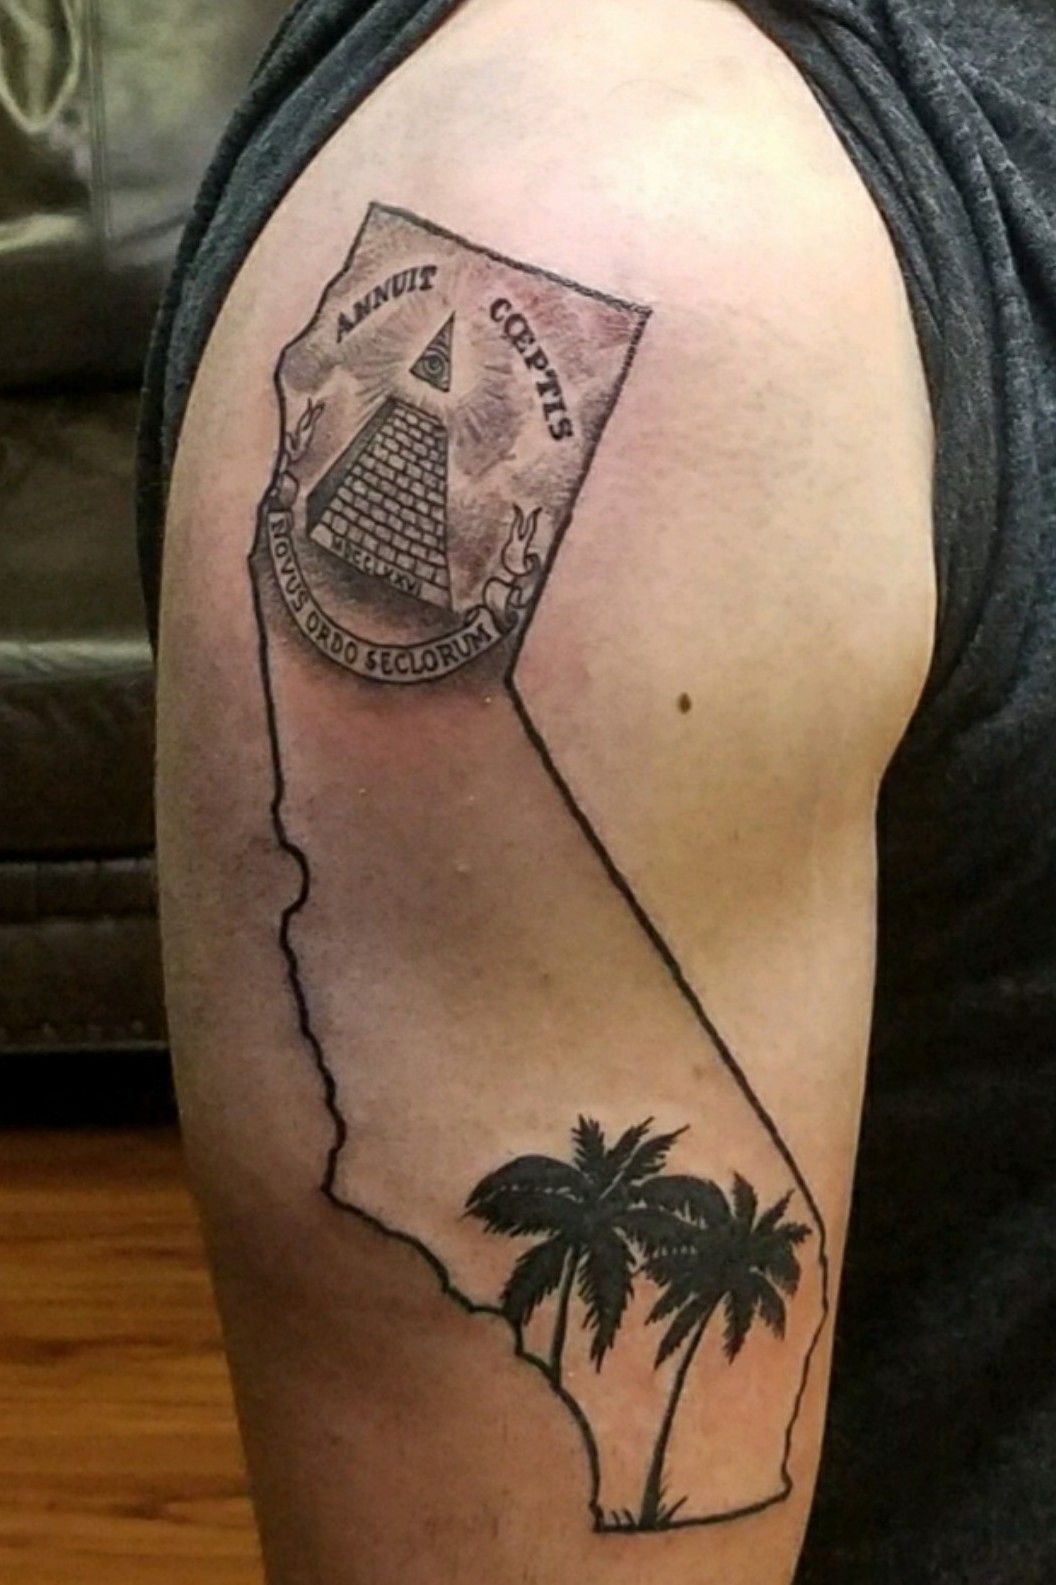 California themed tattoo done on the tricep